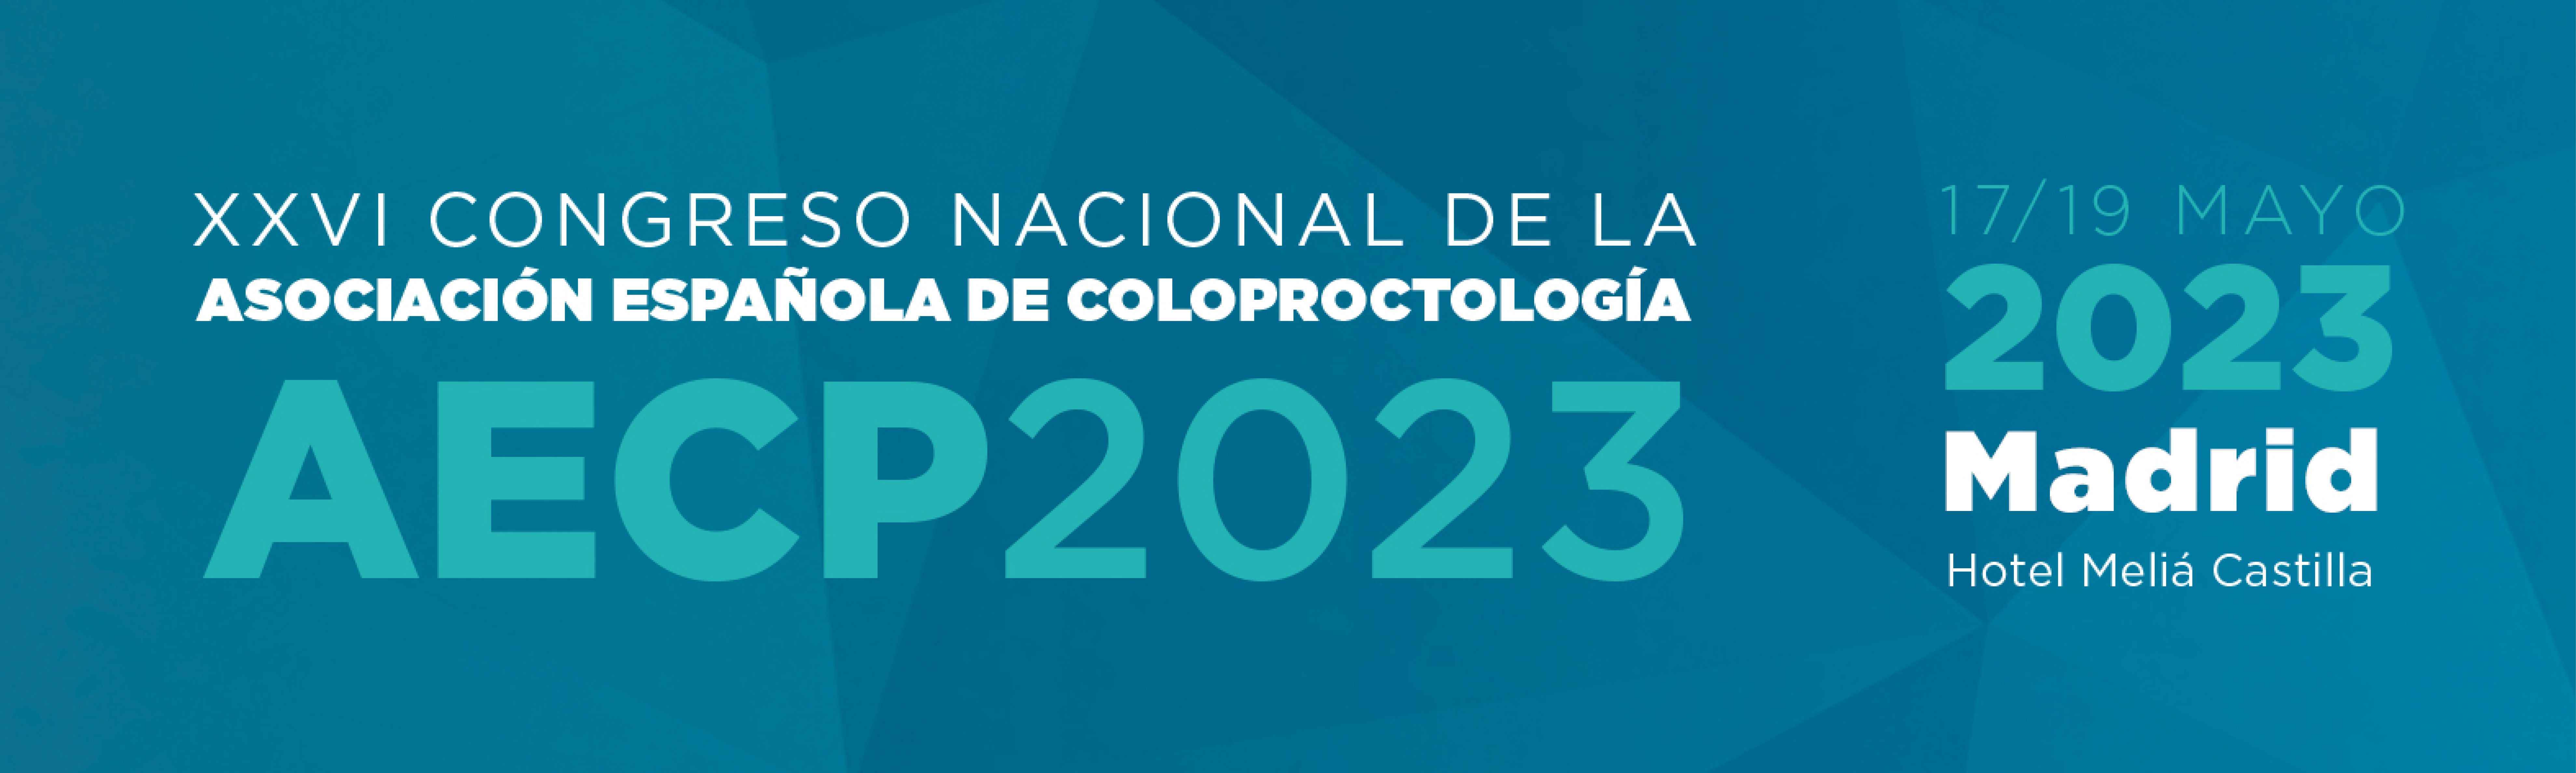 XXVI National Congress of the Spanish Association of Coloproctology (AECP), 17-19 May 2023, Madrid